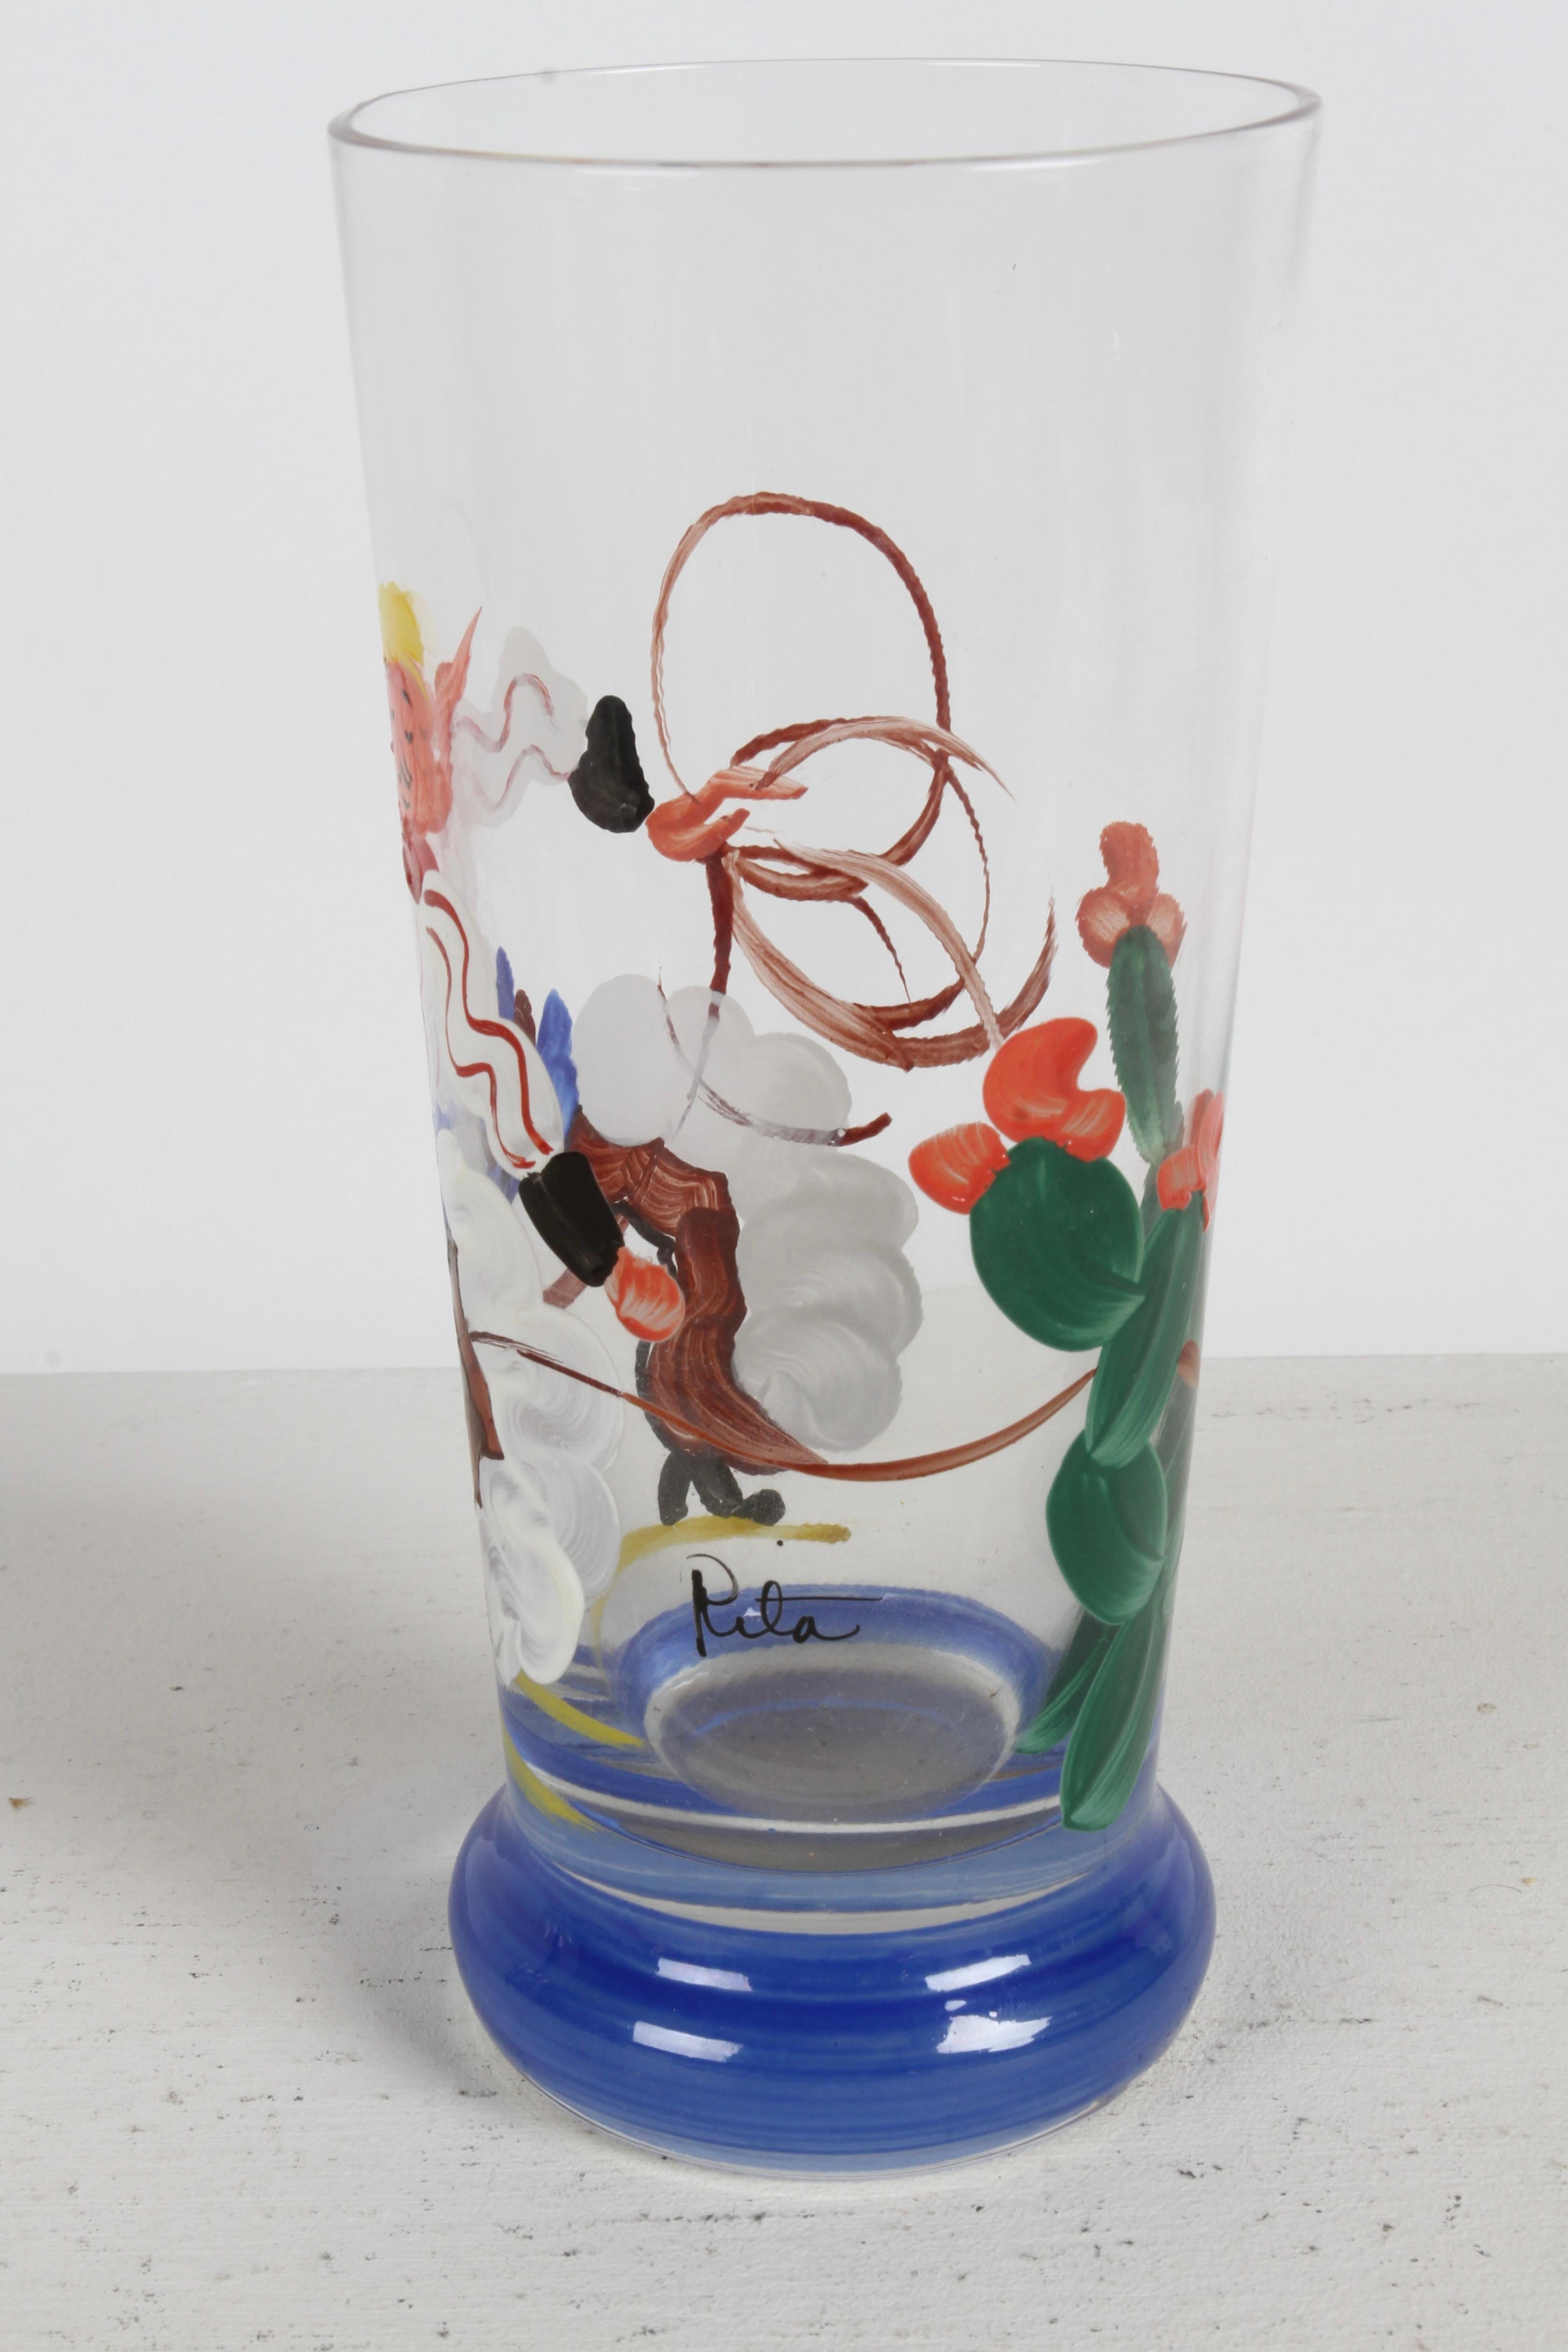 1940s Artist Hand-Painted Bar Glasses with Cowboy, Lasso & Cactus Theme - Rita  For Sale 1